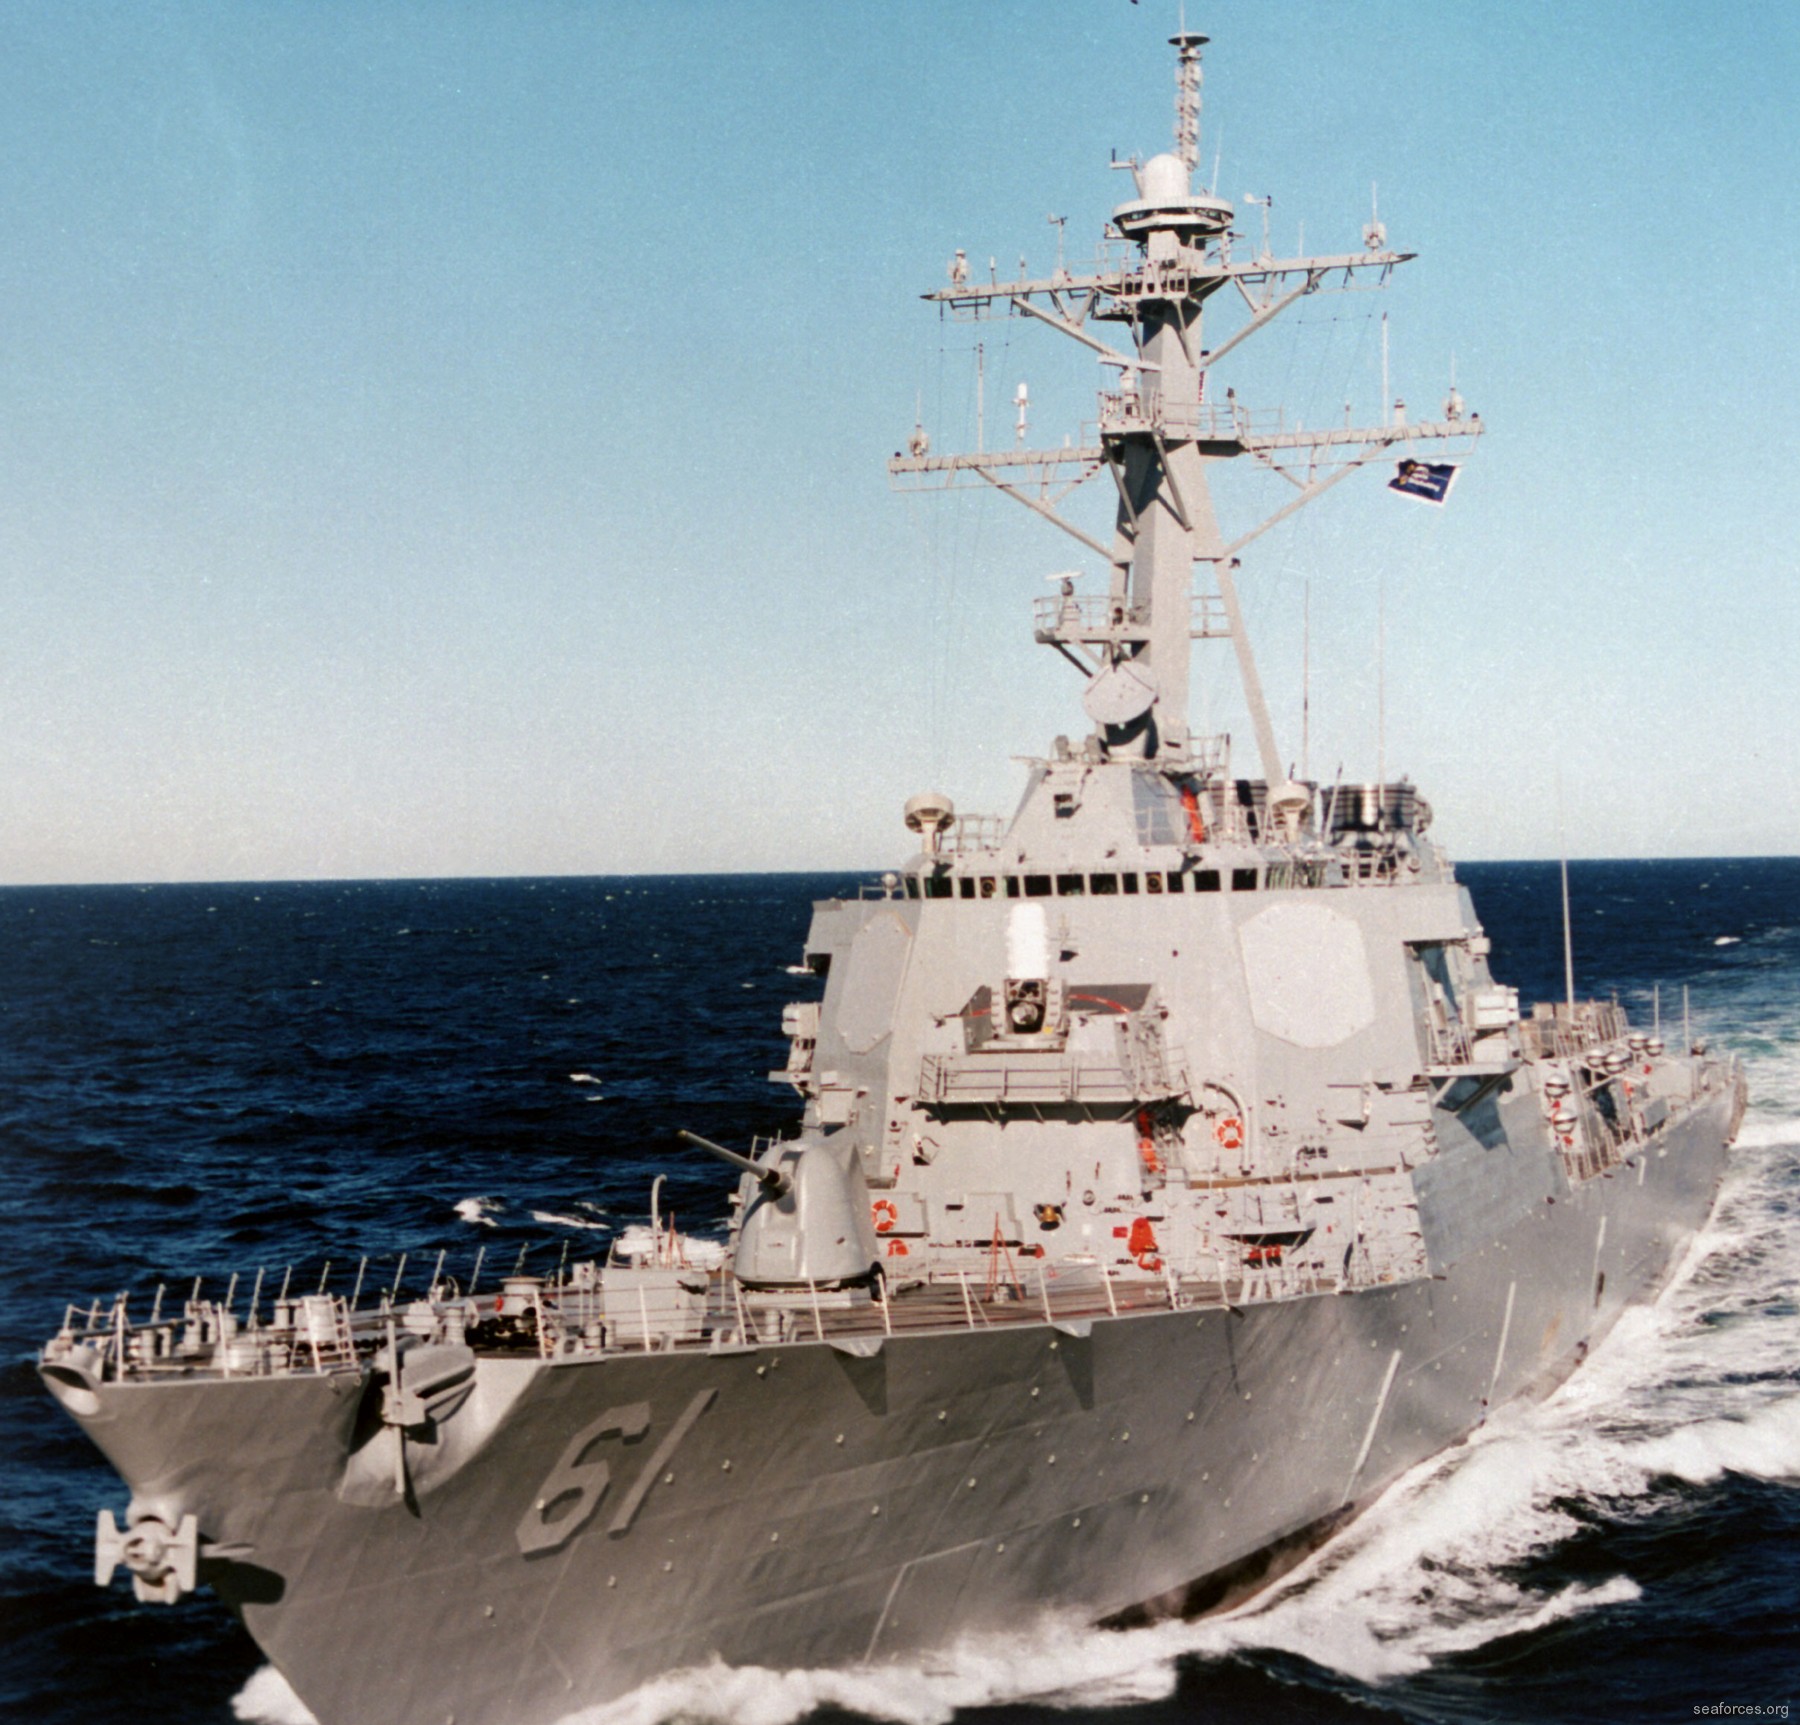 ddg-61 uss ramage guided missile destroyer us navy 67 sea trials